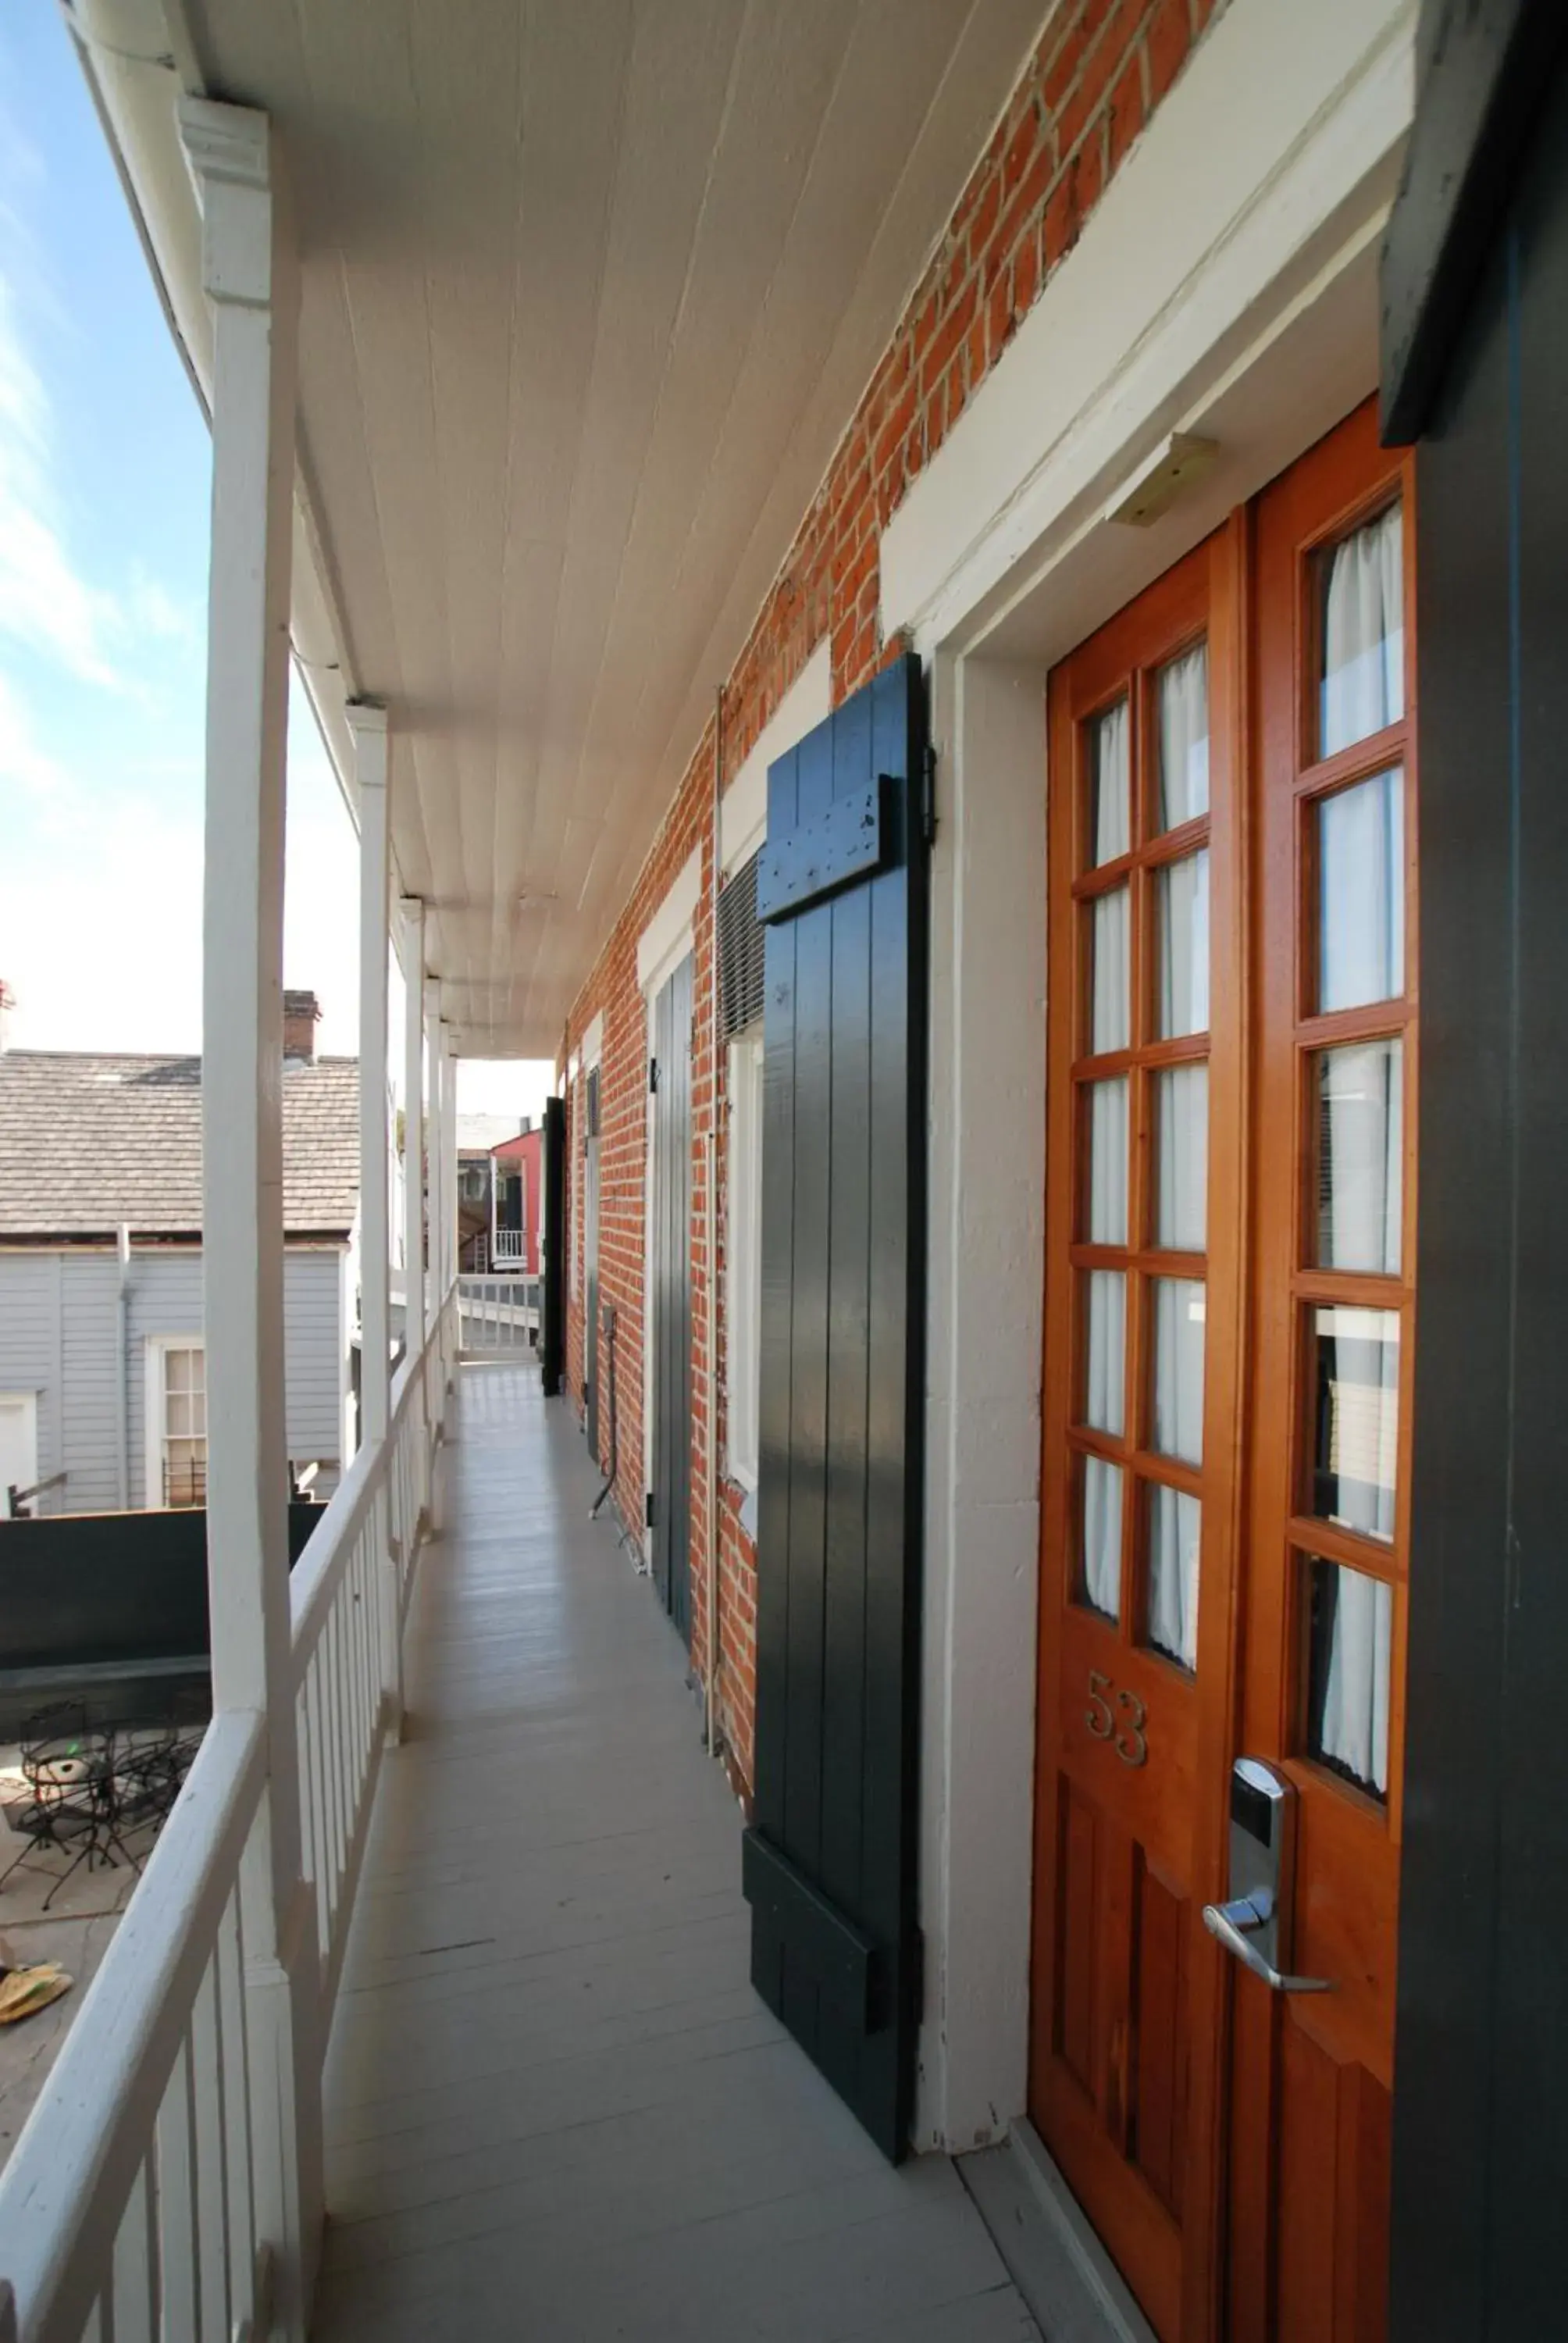 Balcony/Terrace in Inn on St. Ann, a French Quarter Guest Houses Property